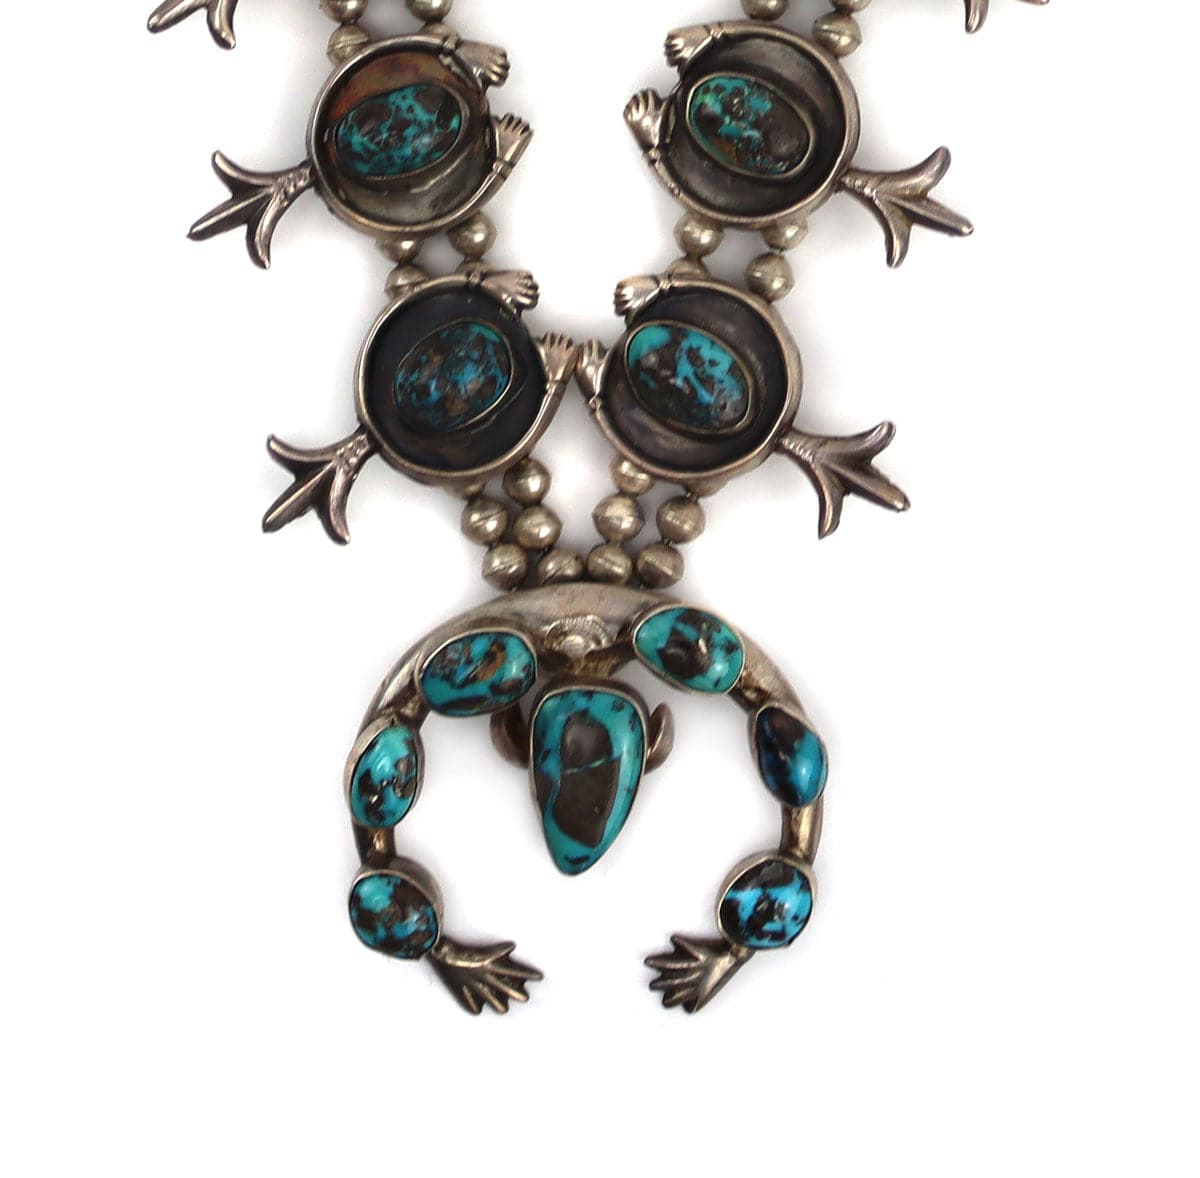 Navajo Persian Turquoise and Silver Squash Blossom Necklace c. 1950s, 28" length (J15240-CO-008) 1